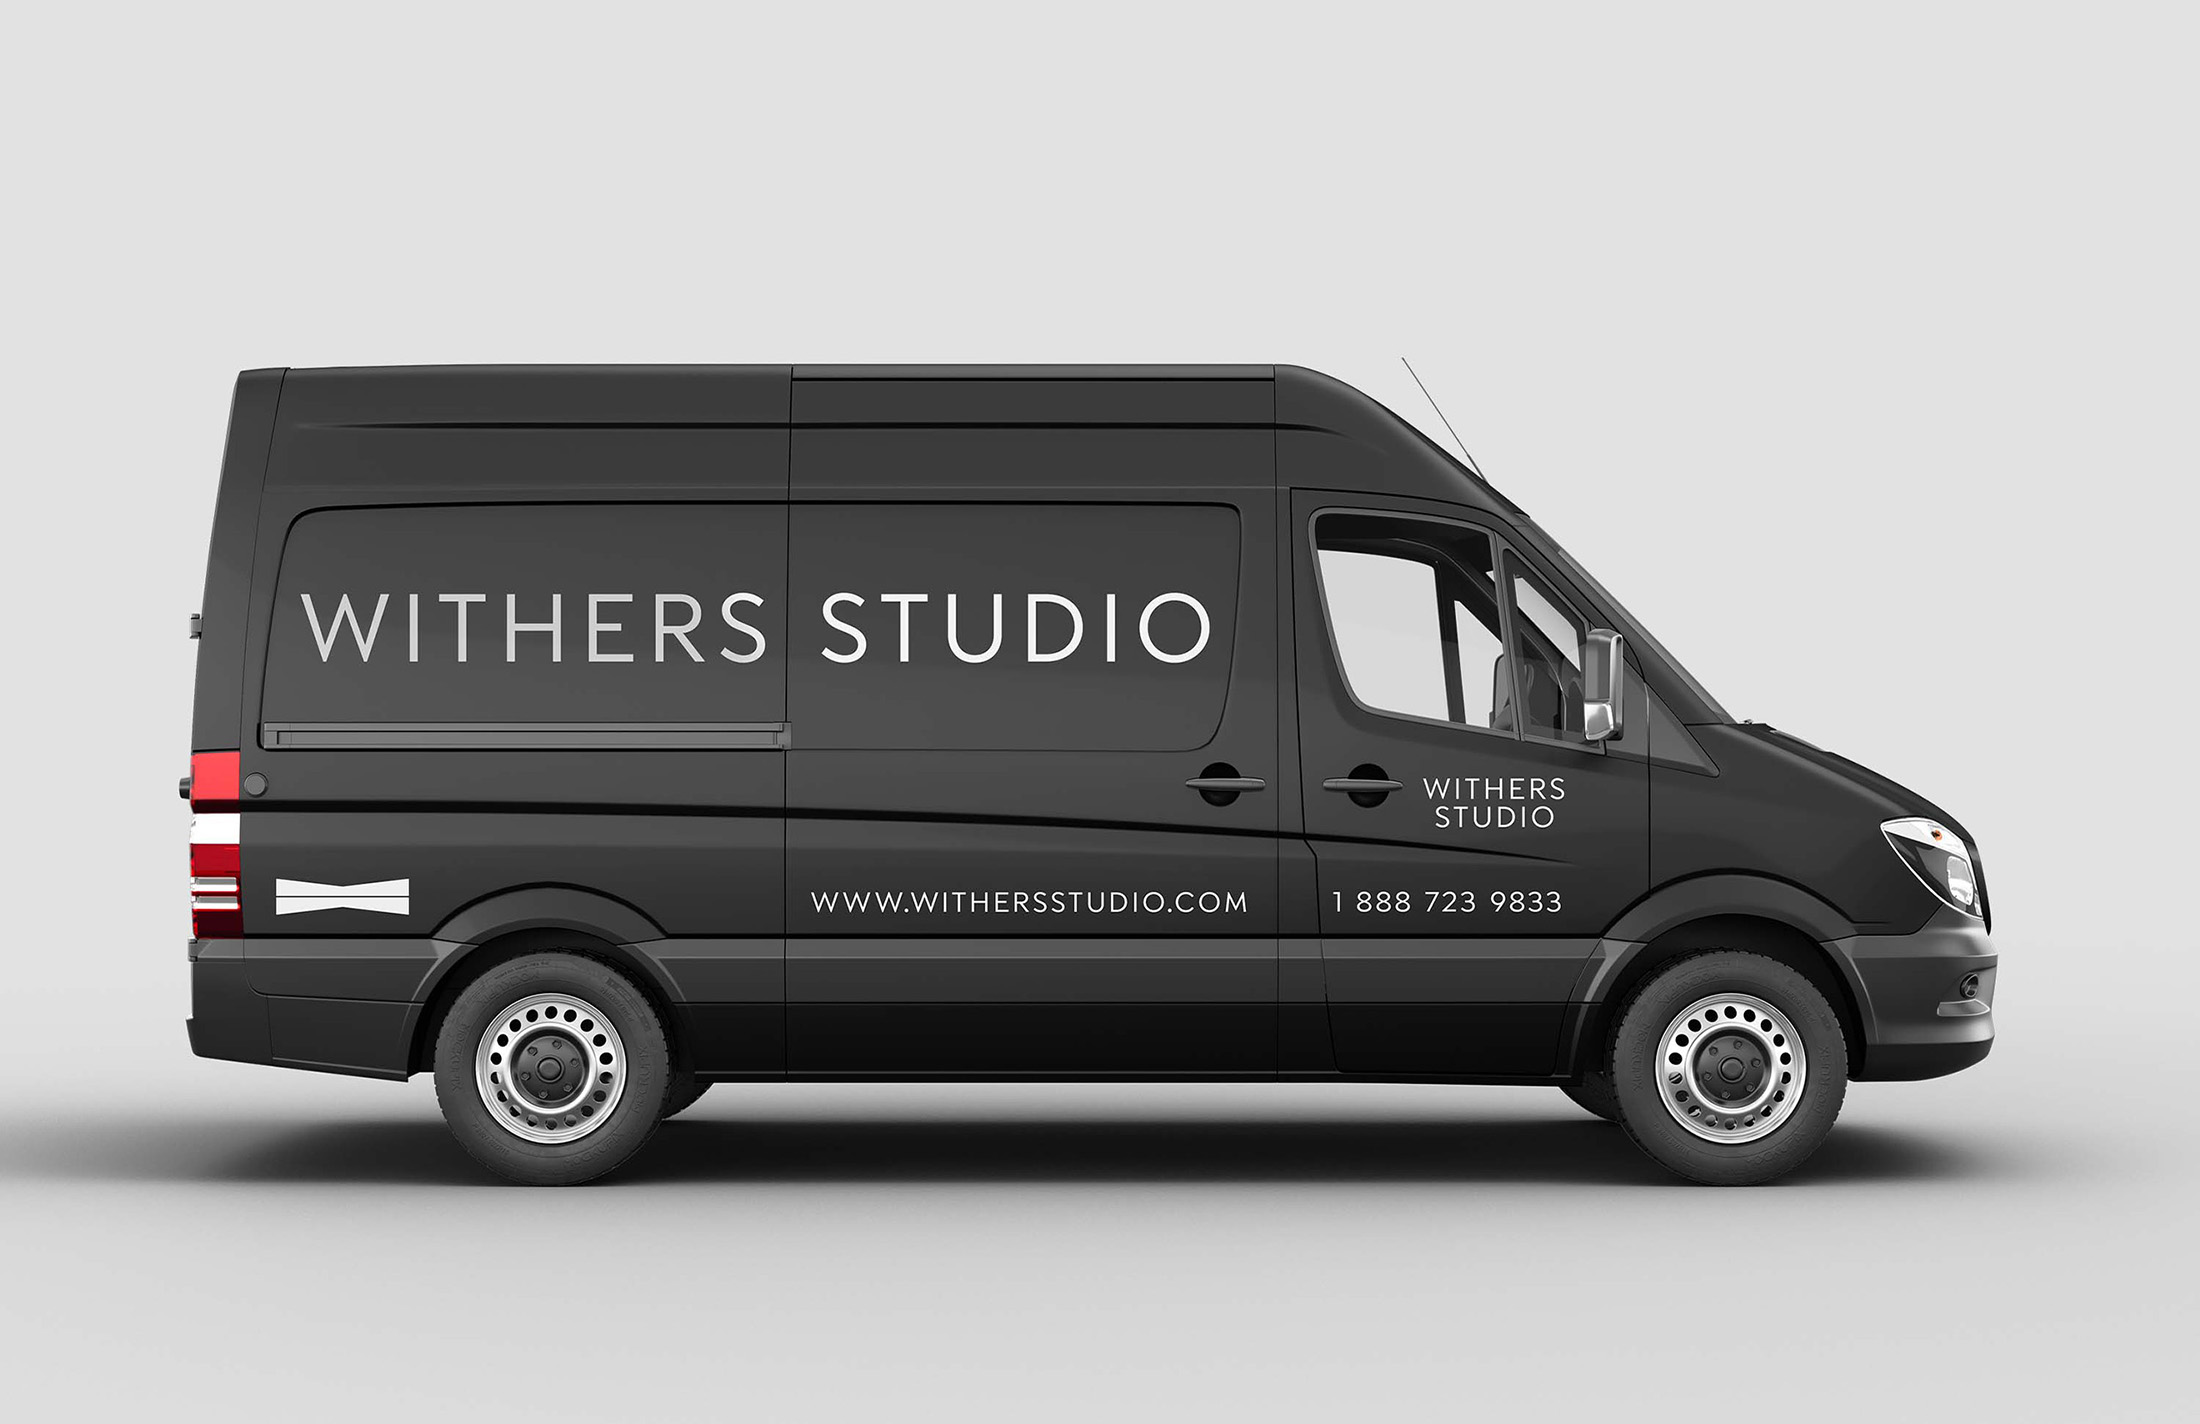 Brand signage on delivery van - Withers Studio - Whiskey and Red Small Business Branding and Website Design Packages